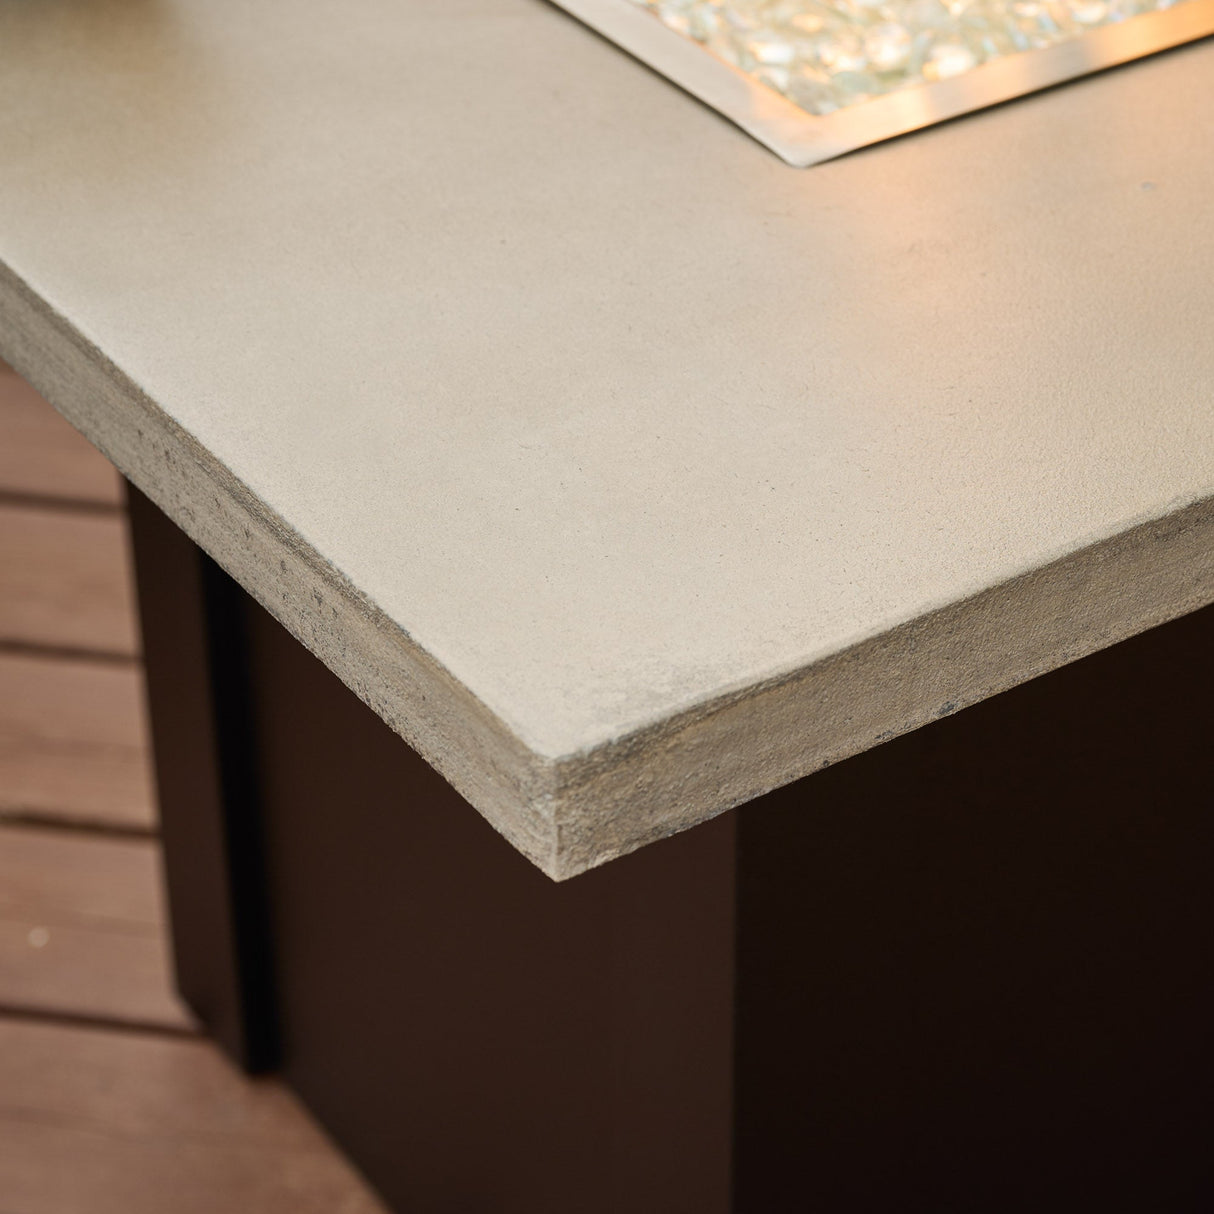 A close up view of the texture on the Pebble Grey Havenwood Rectangular Gas Fire Pit Table